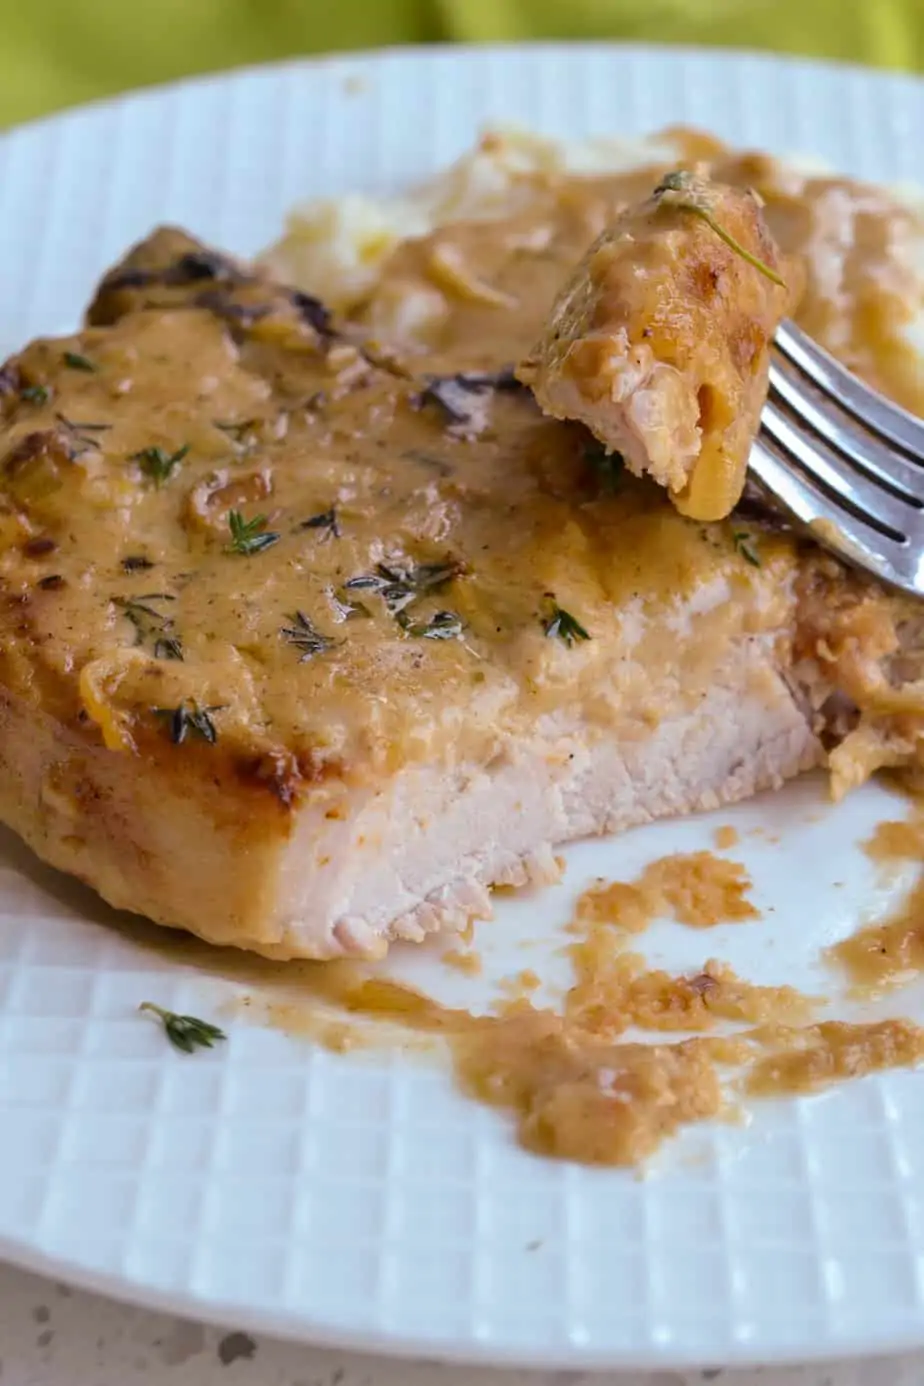 These classic Smothered Pork Chops are lightly breaded pork chops, pan-fried and drenched in a creamy and flavorful easy-to-make pan gravy. 